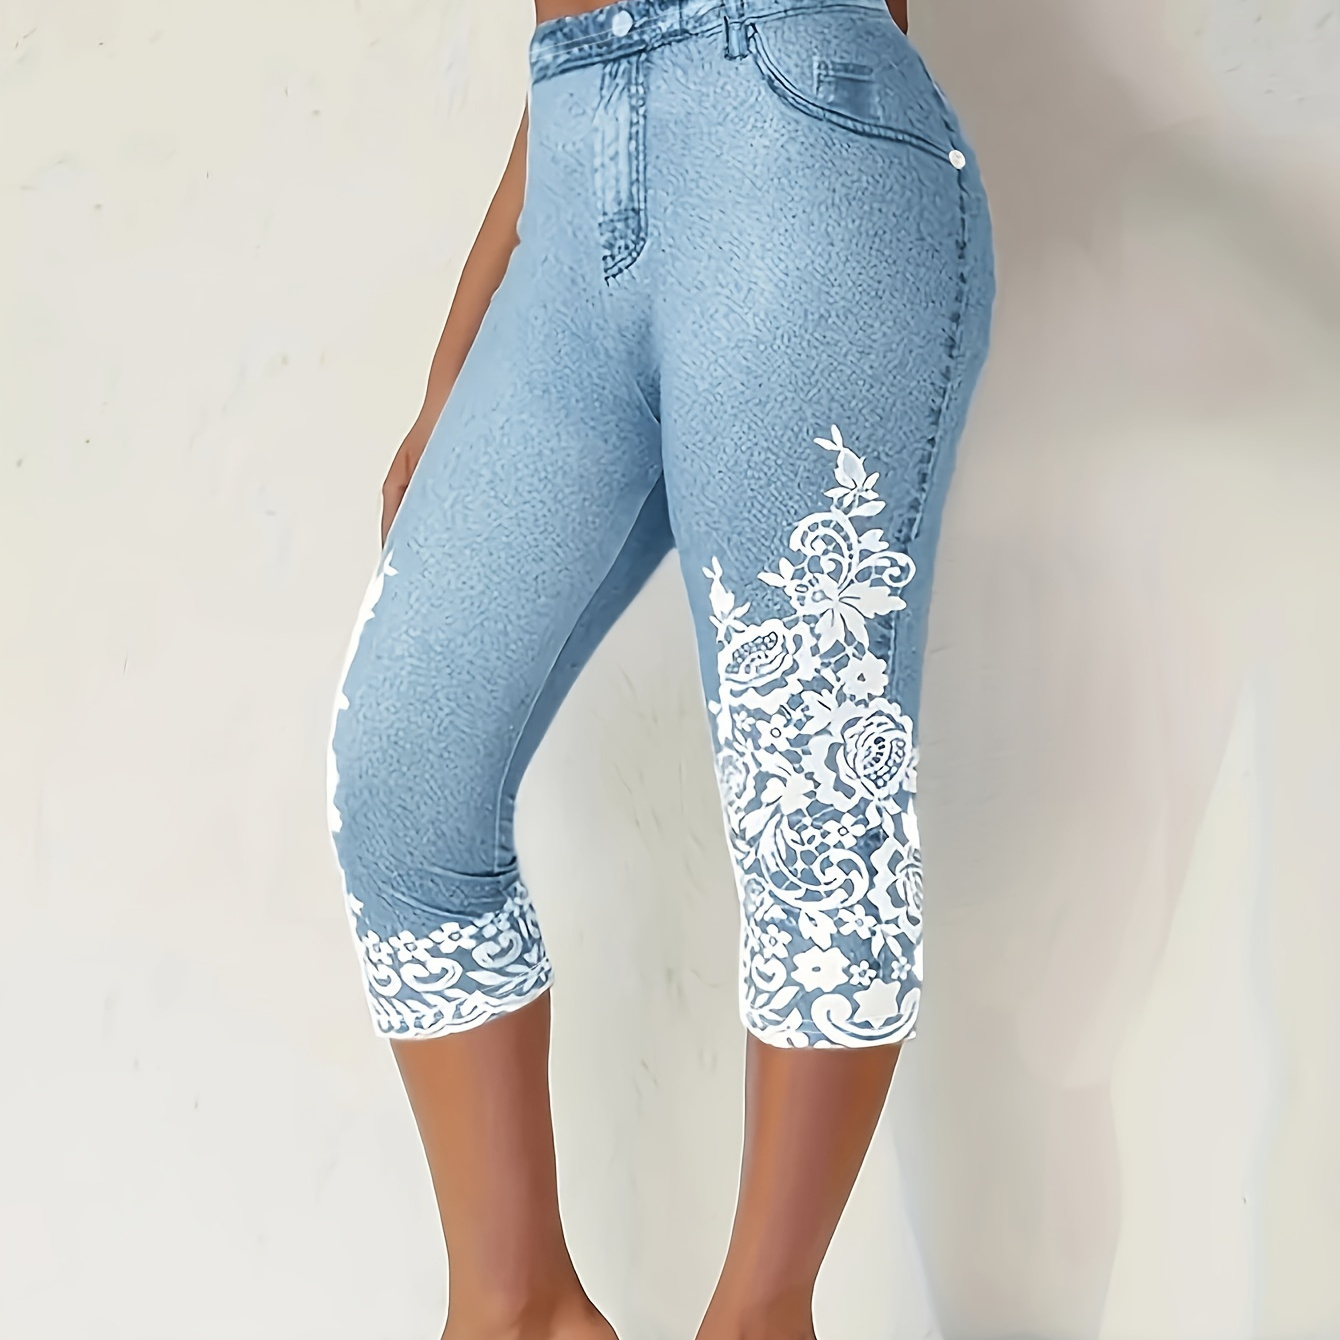 

Women's Casual Faux Denim Print Capri Leggings With Floral Print, Stretchy Skinny Faux Jeans, Mid-rise, Comfort Fit, Fashion Bottoms, Summer Wear